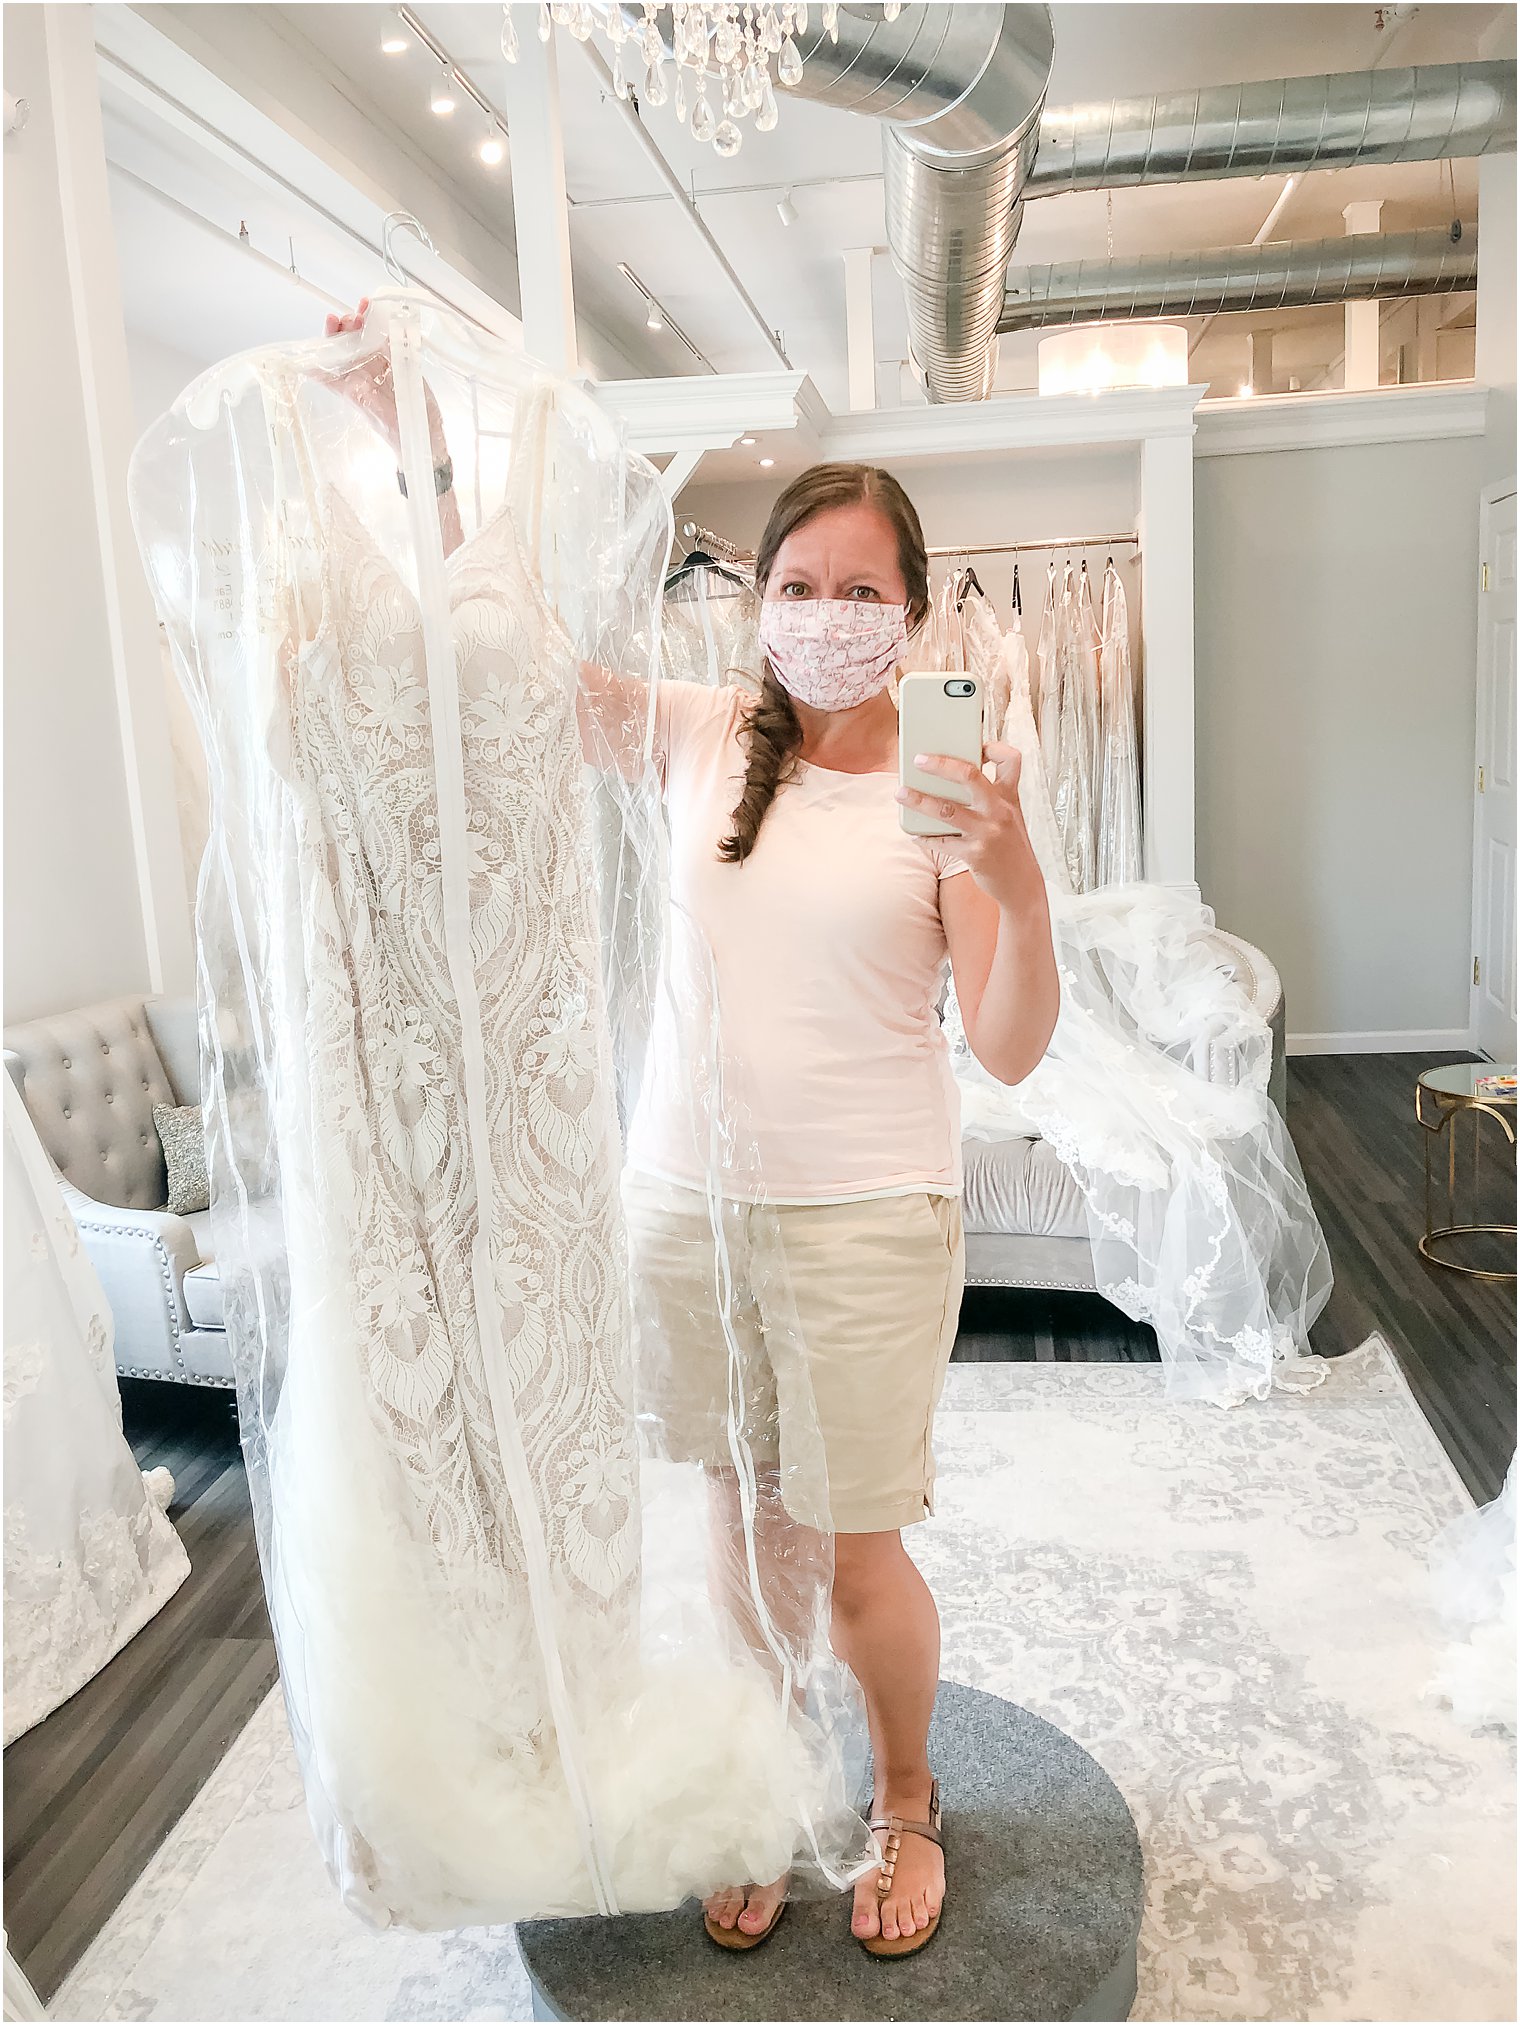 Behind-the-scenes of a styled shoot - picking up the wedding dress at White House Bride